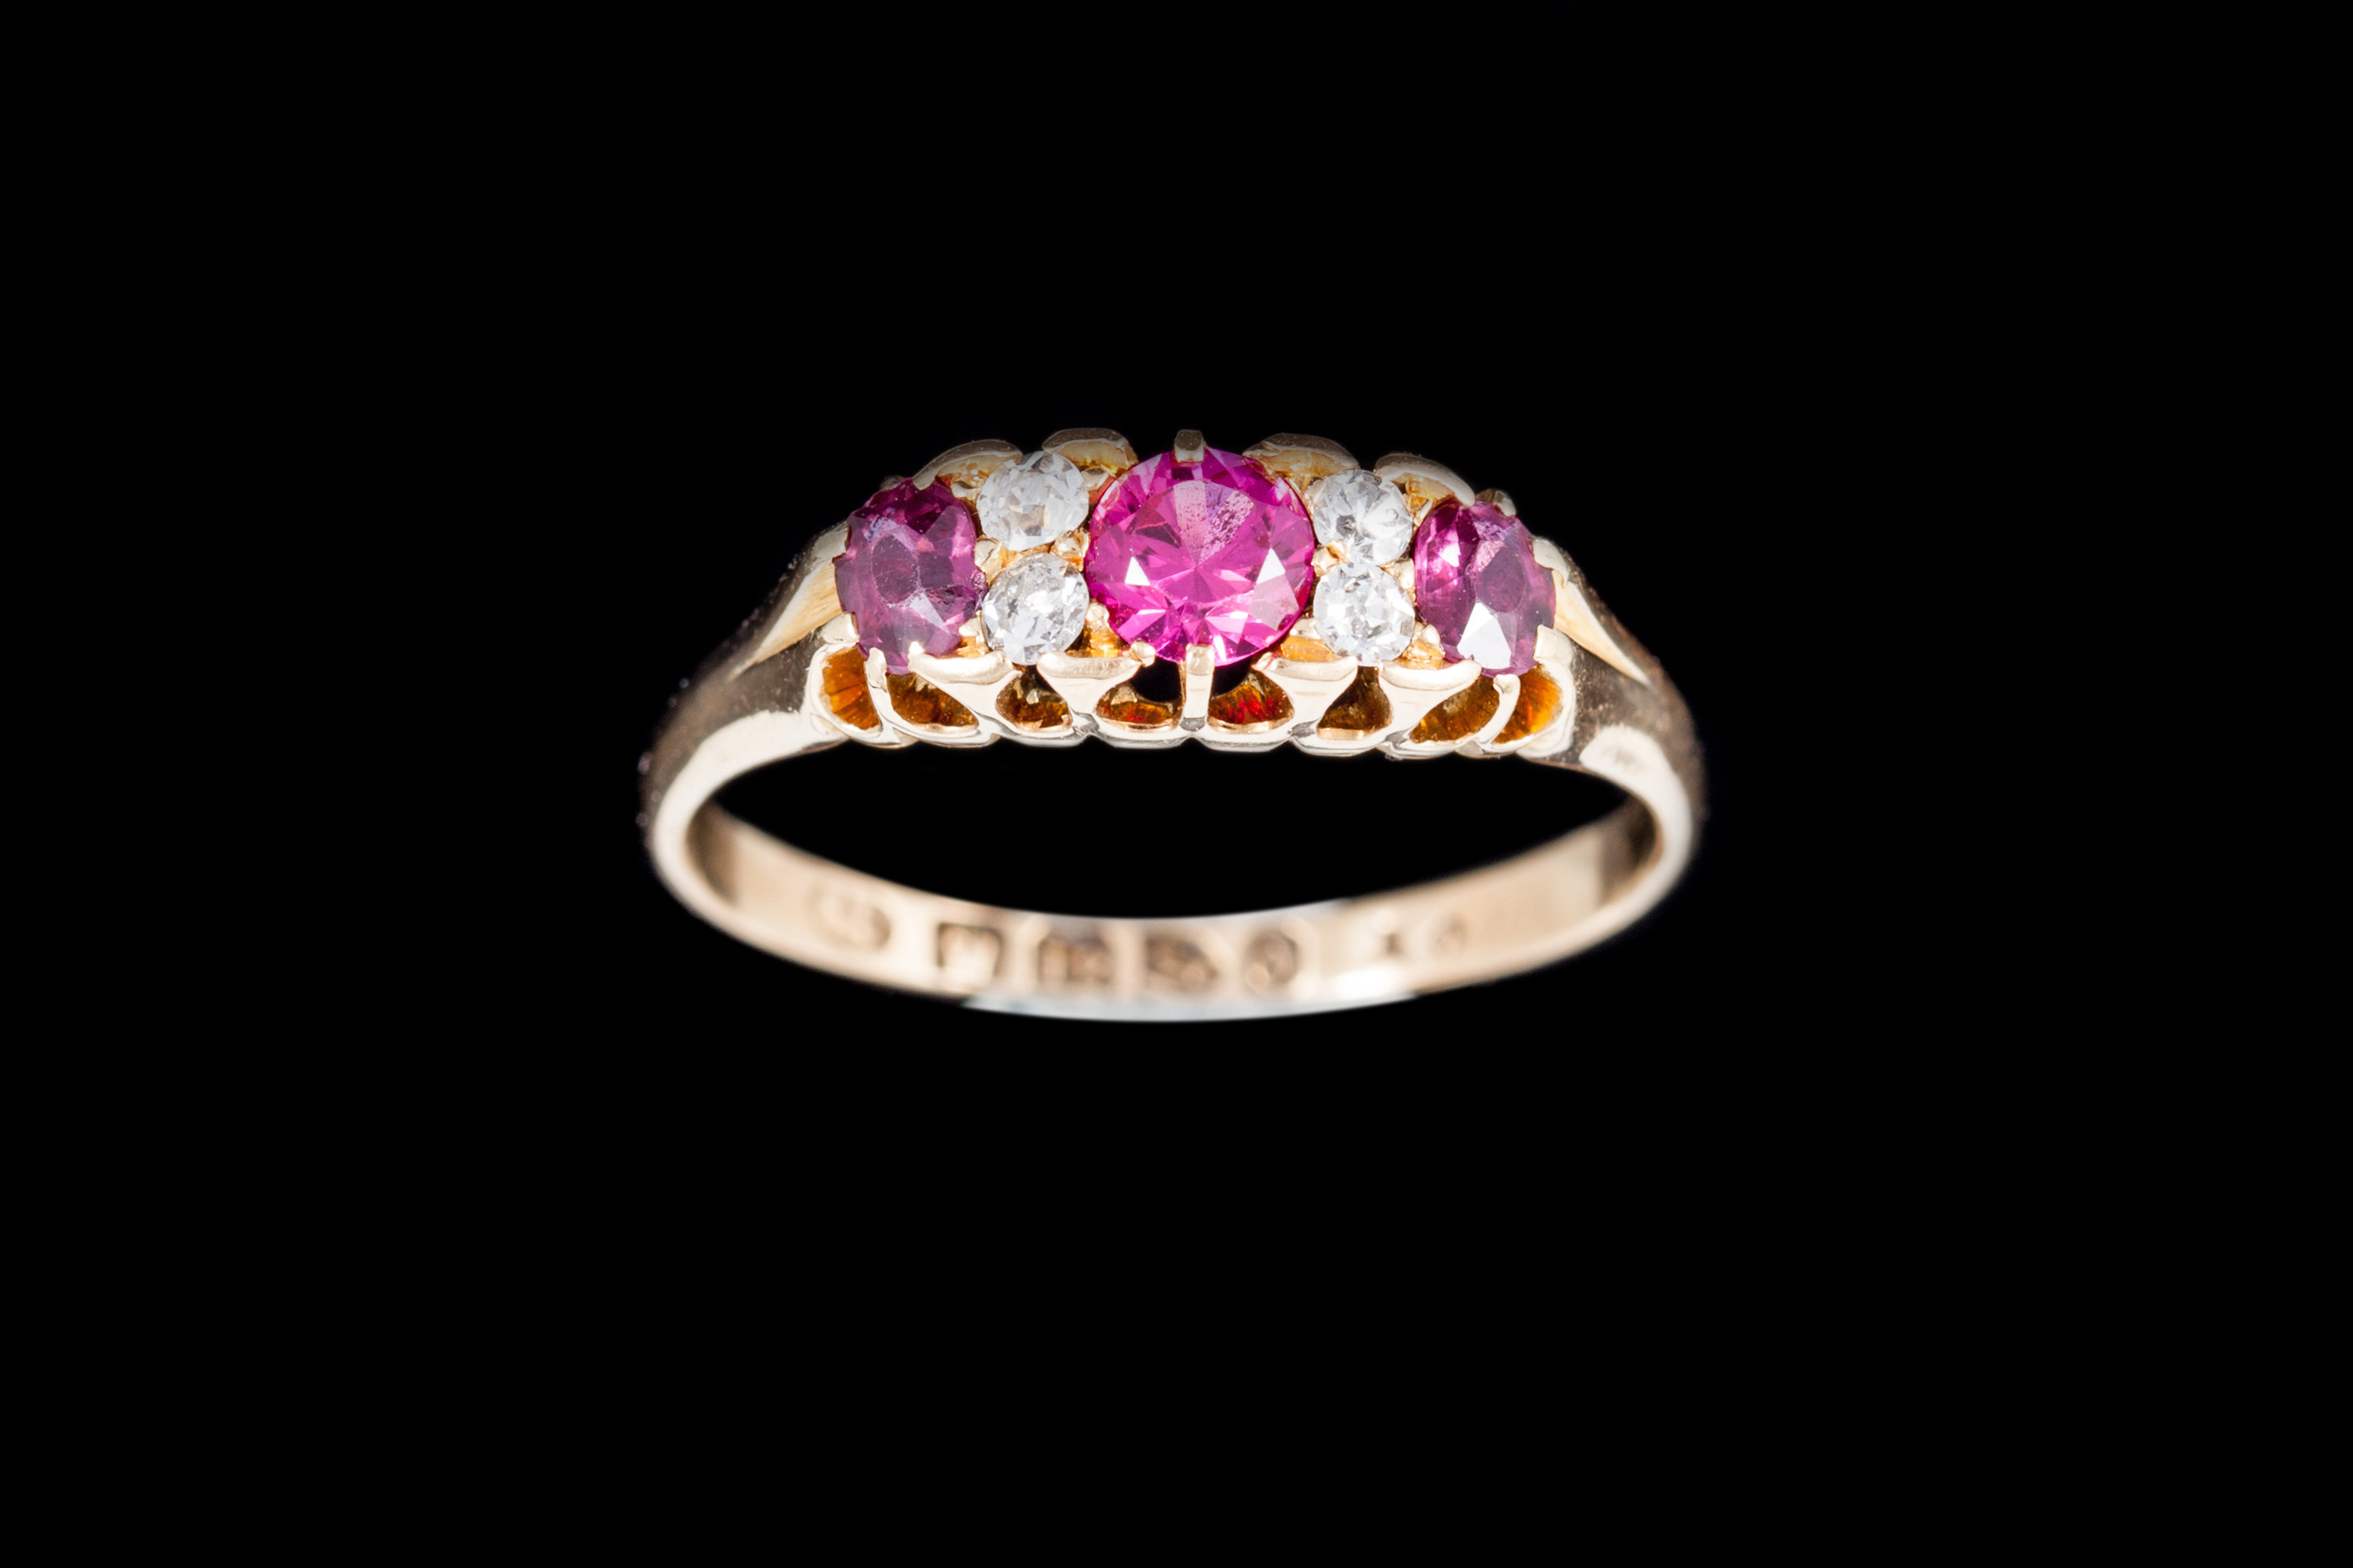 A VICTORIAN RUBY AND DIAMOND RING, mounted in 18ct yellow gold